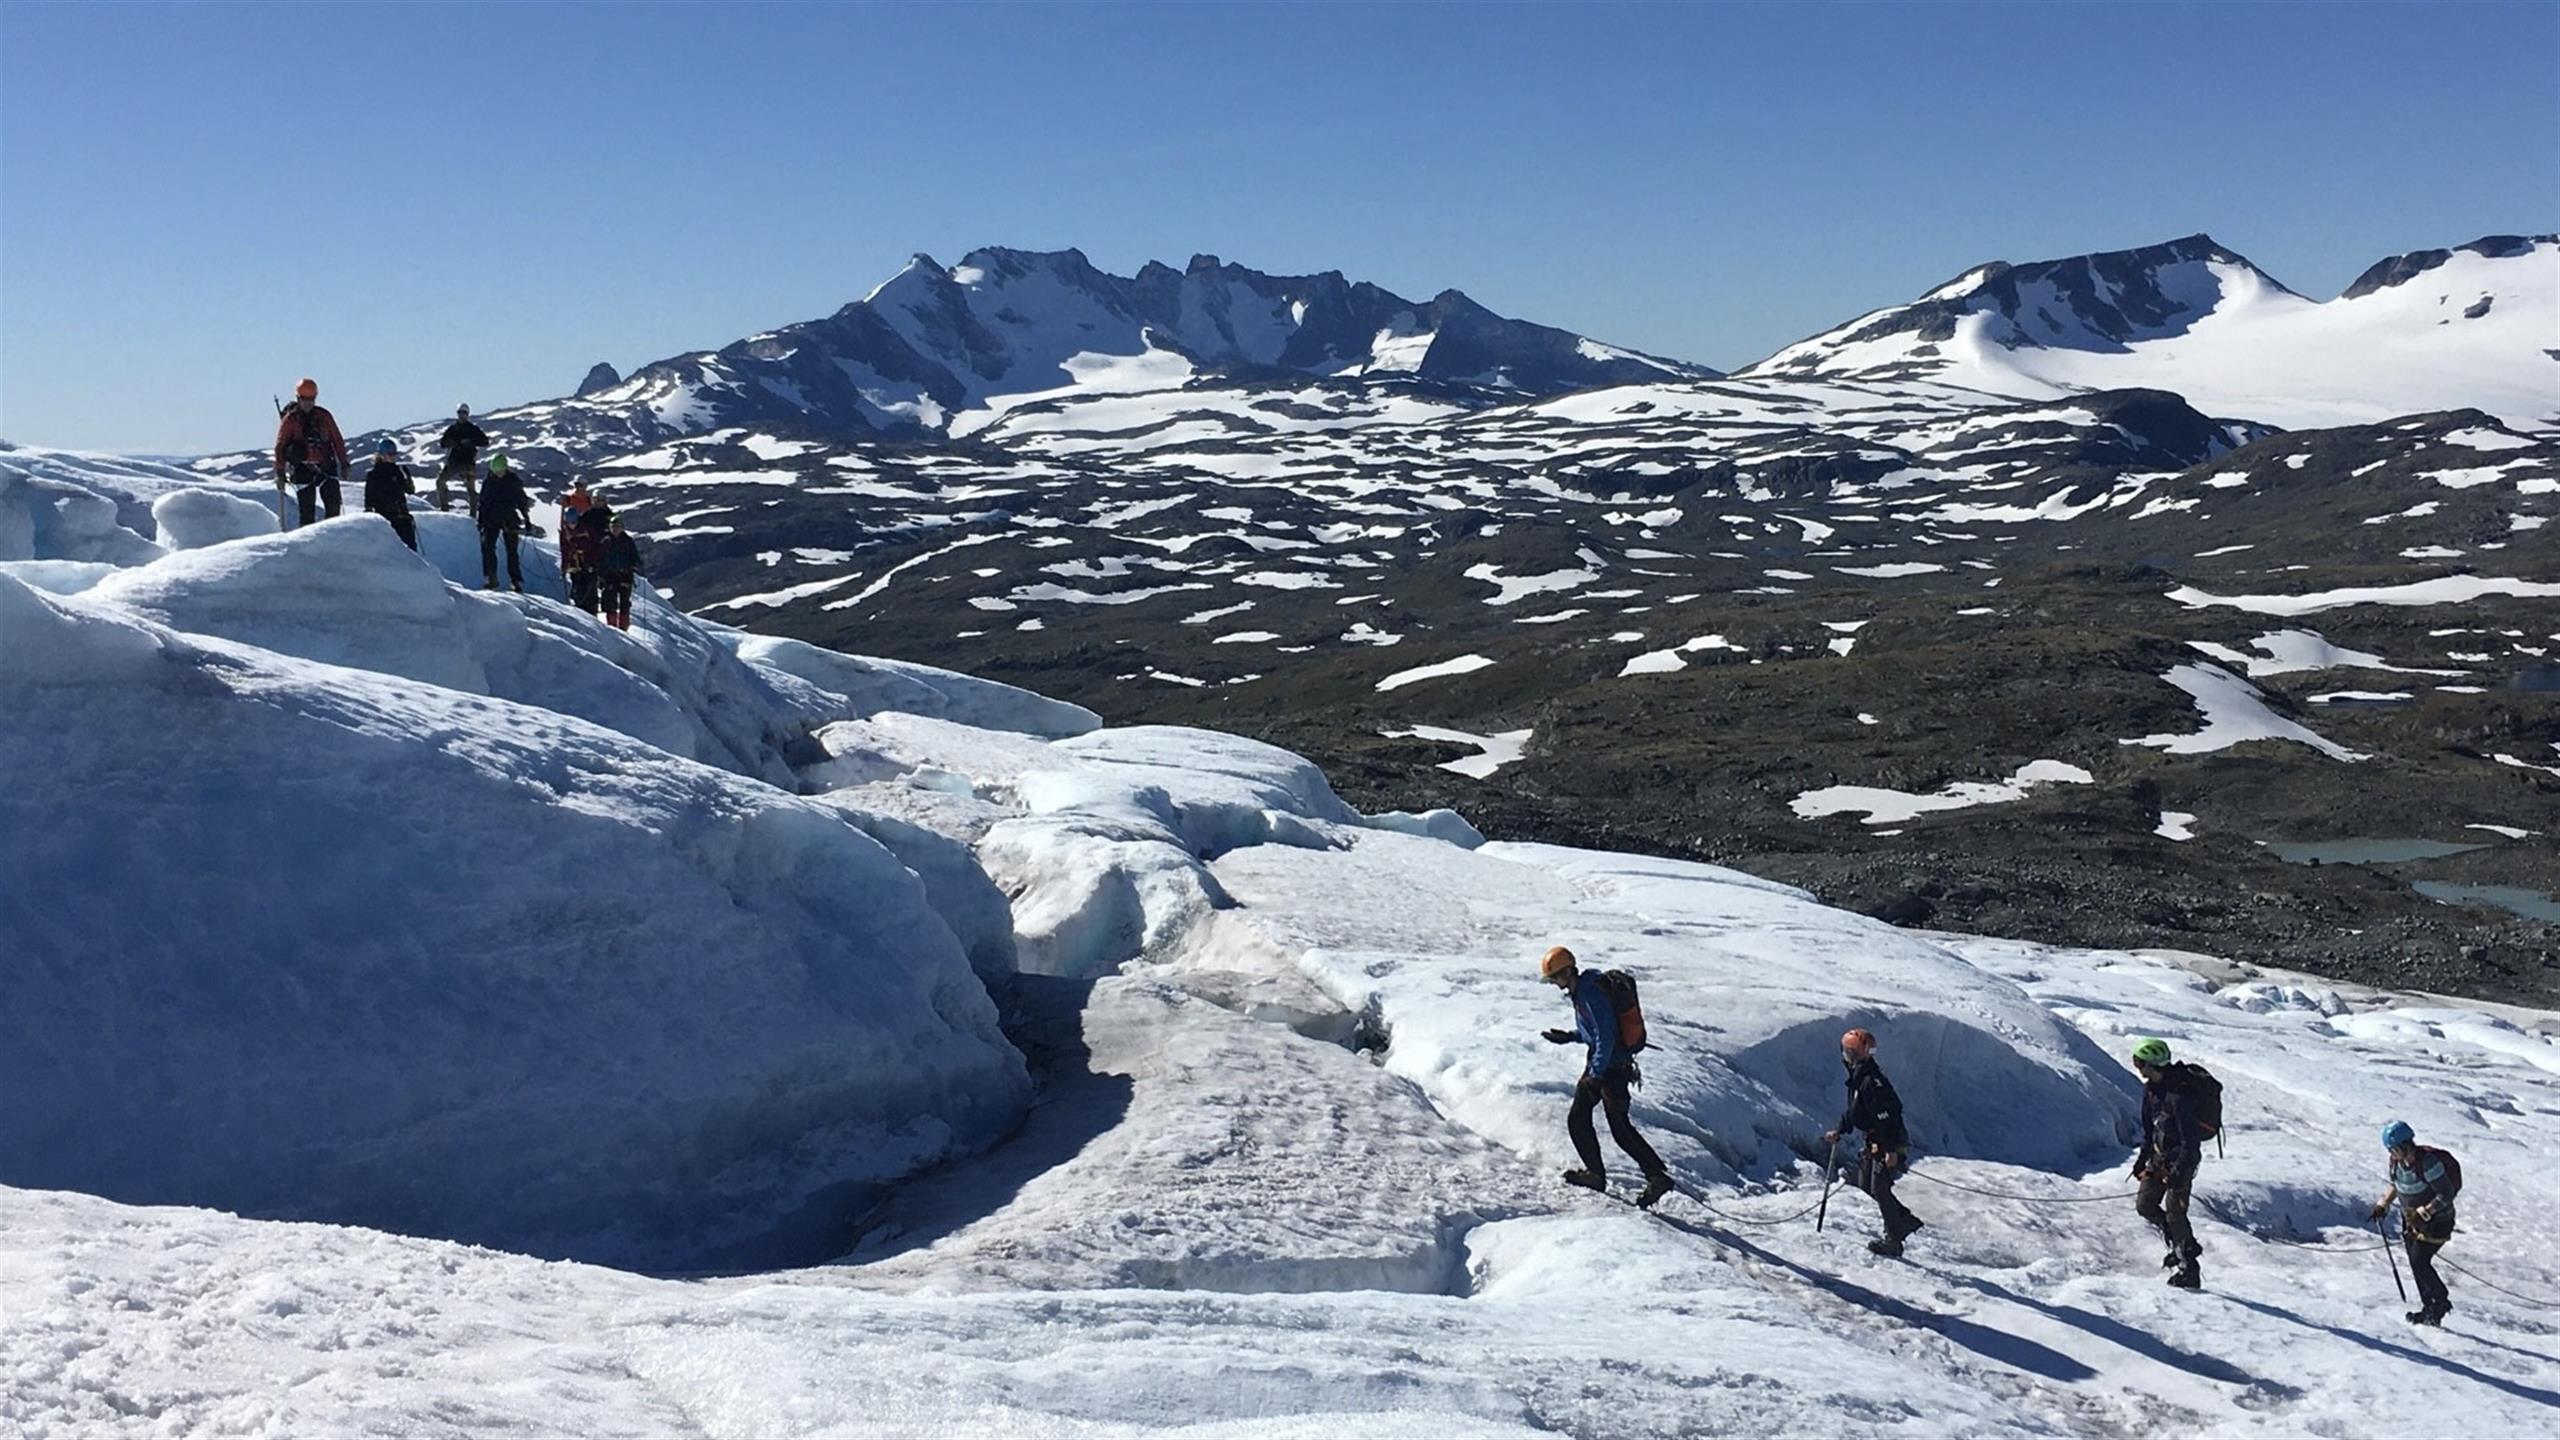 Group on a trip over a glacier.